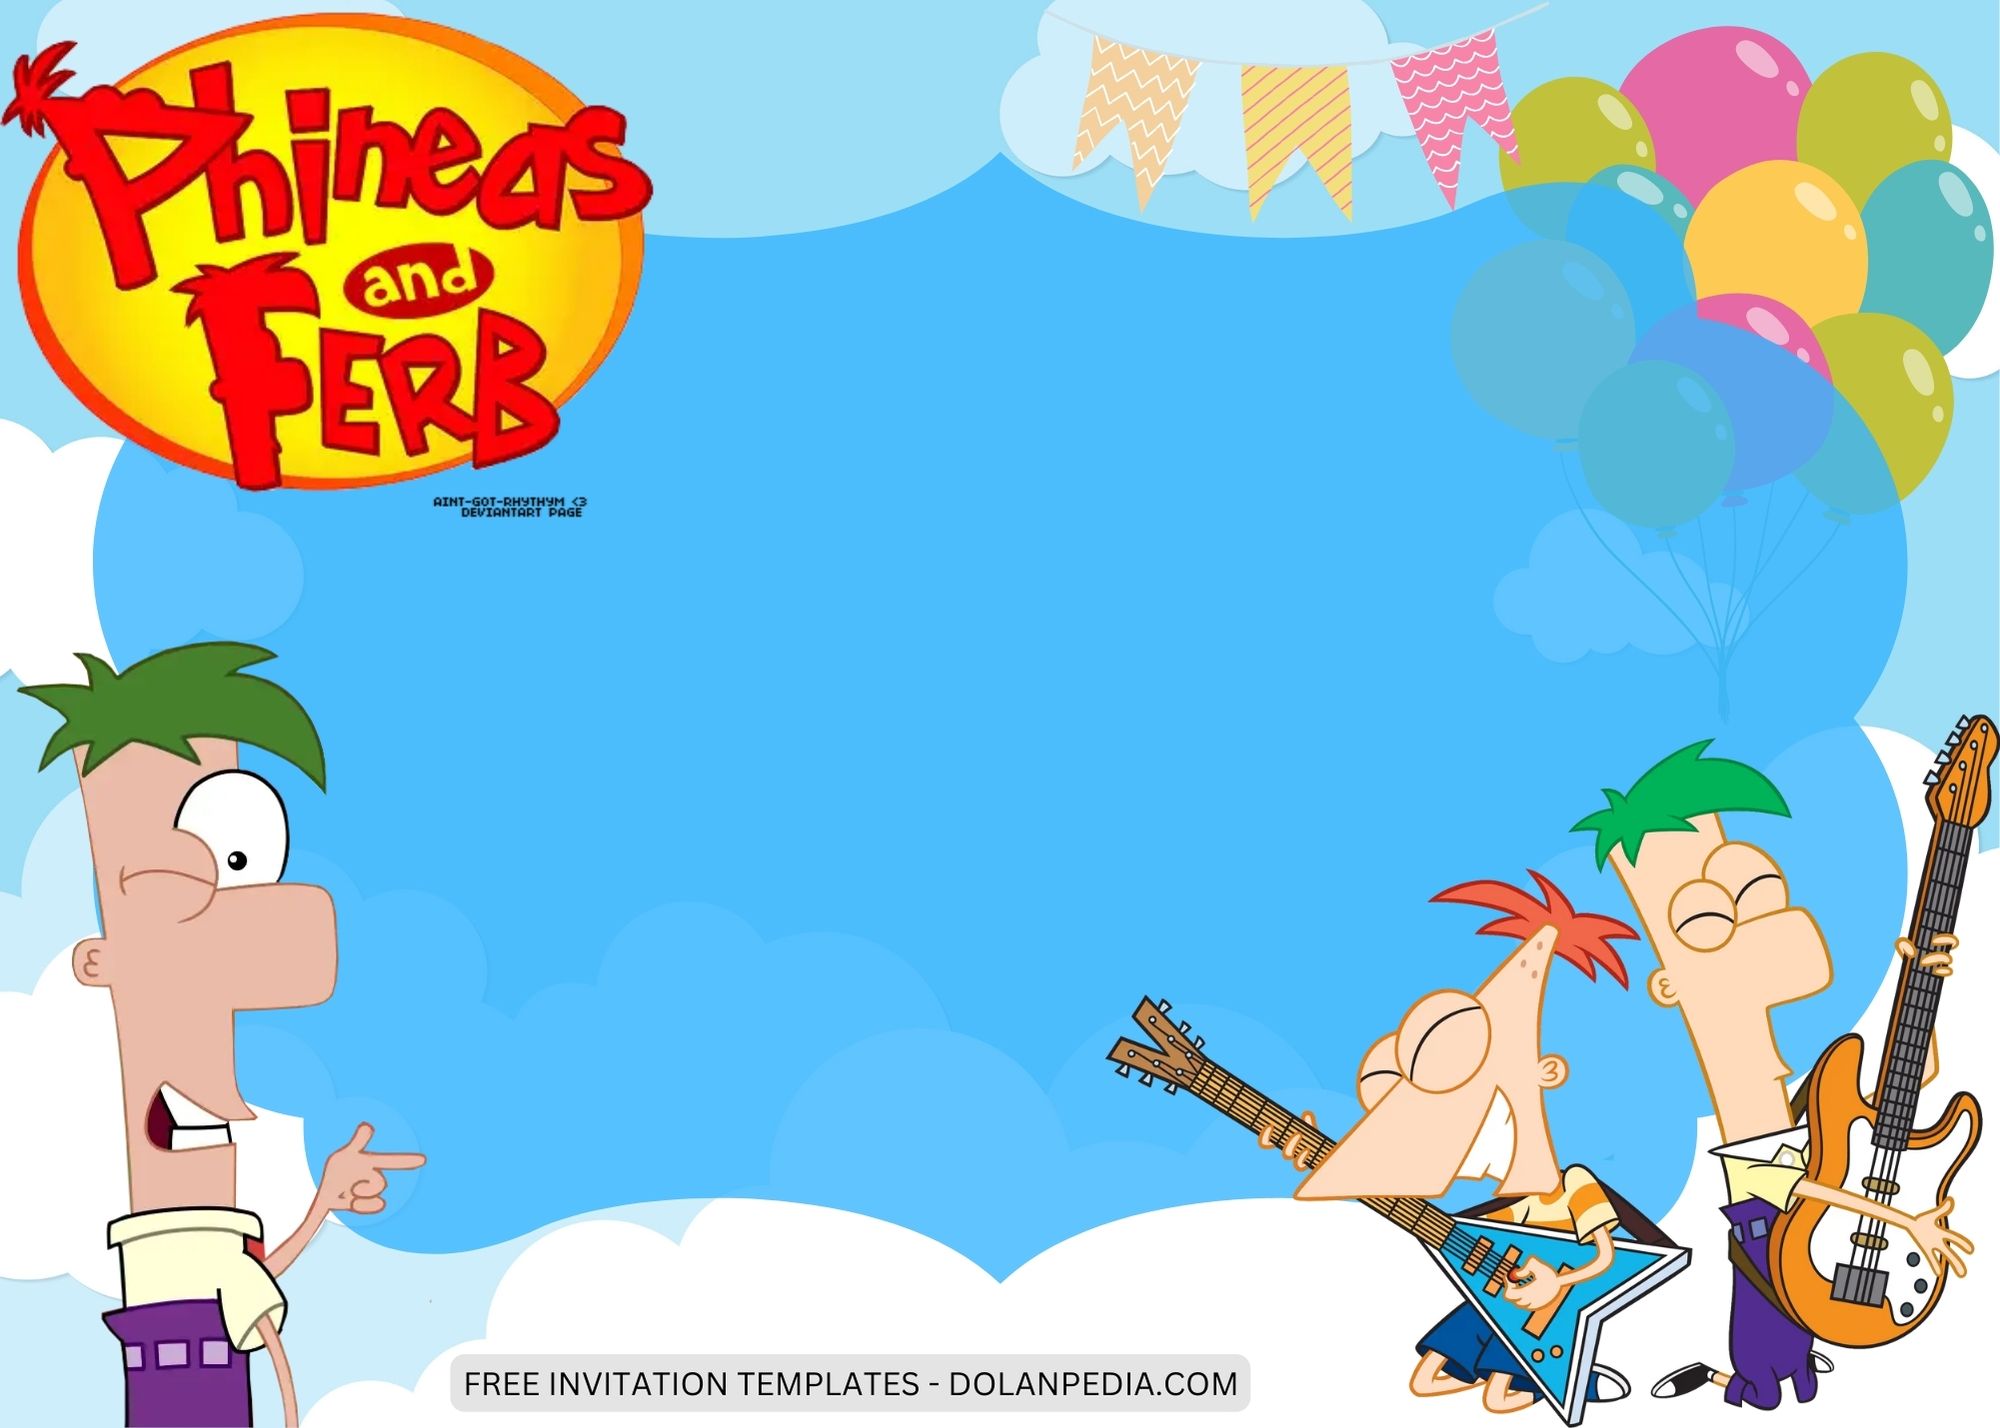 Blank Phineas and Ferb Birthday Invitation Templates One